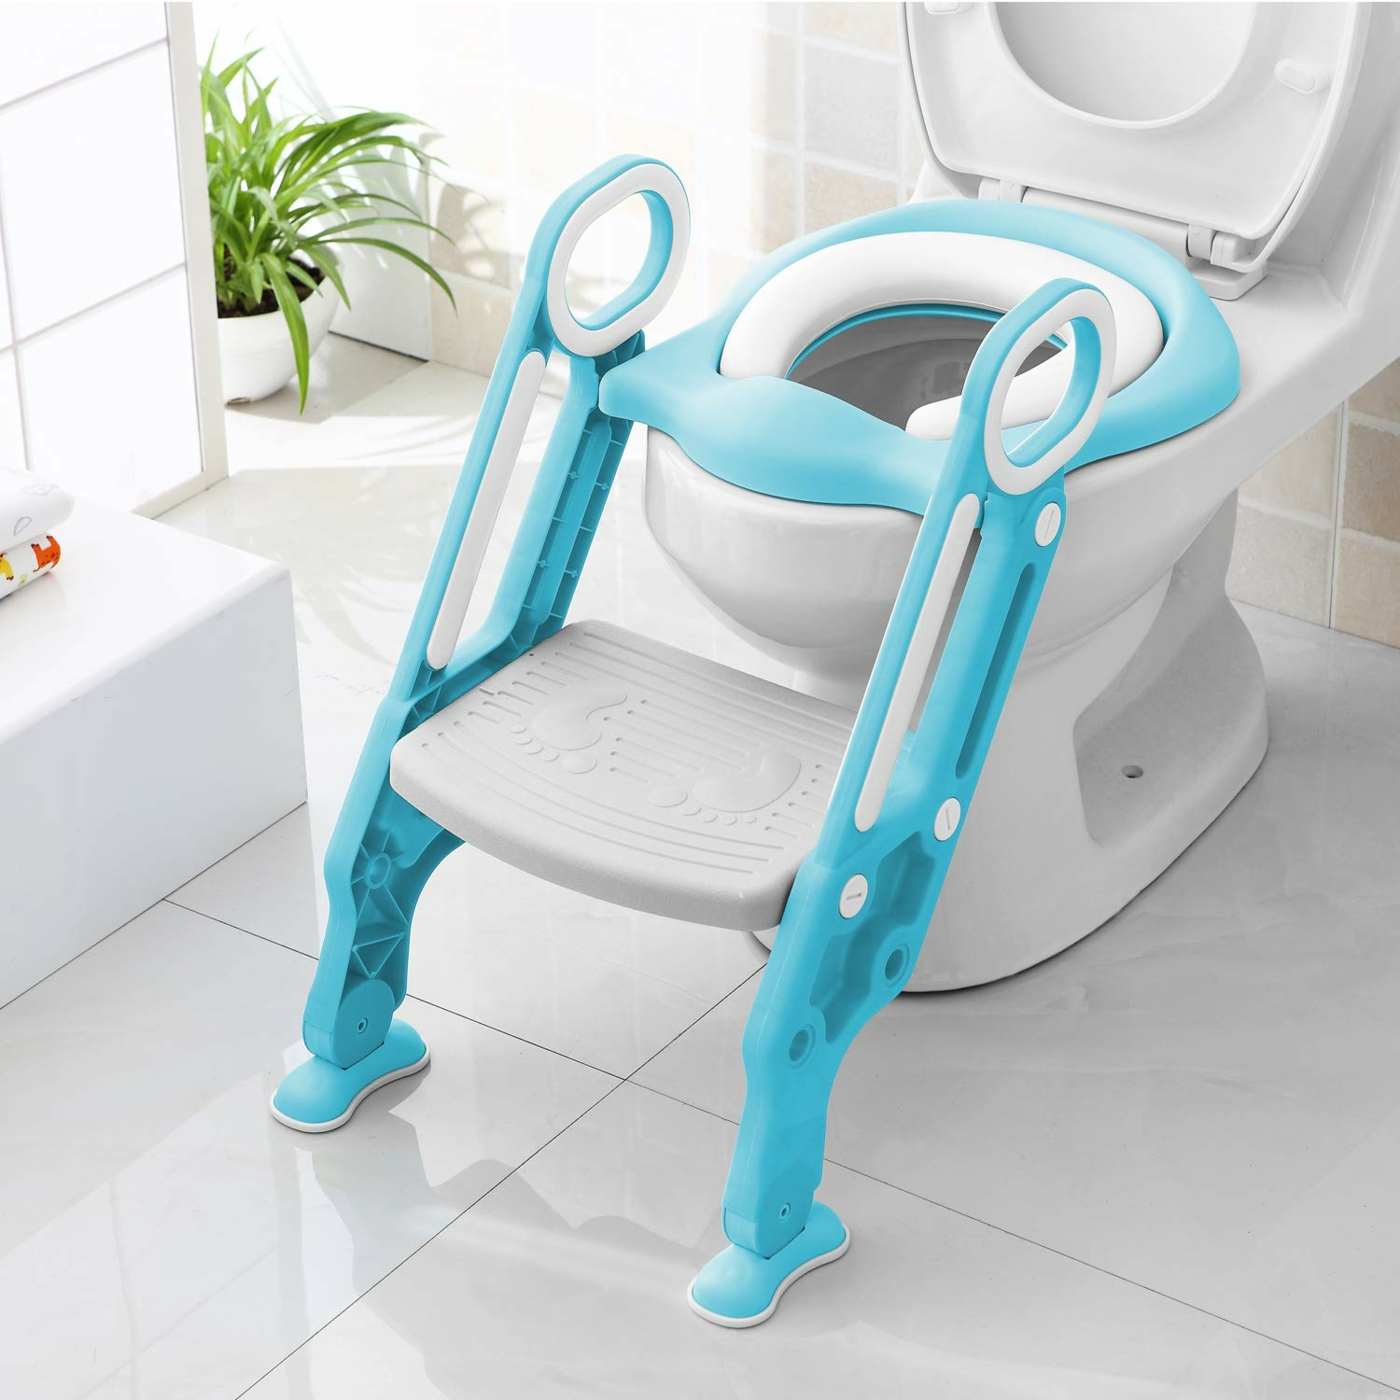 Toilet trainer with guide, seat and gripper for an independent toilet access